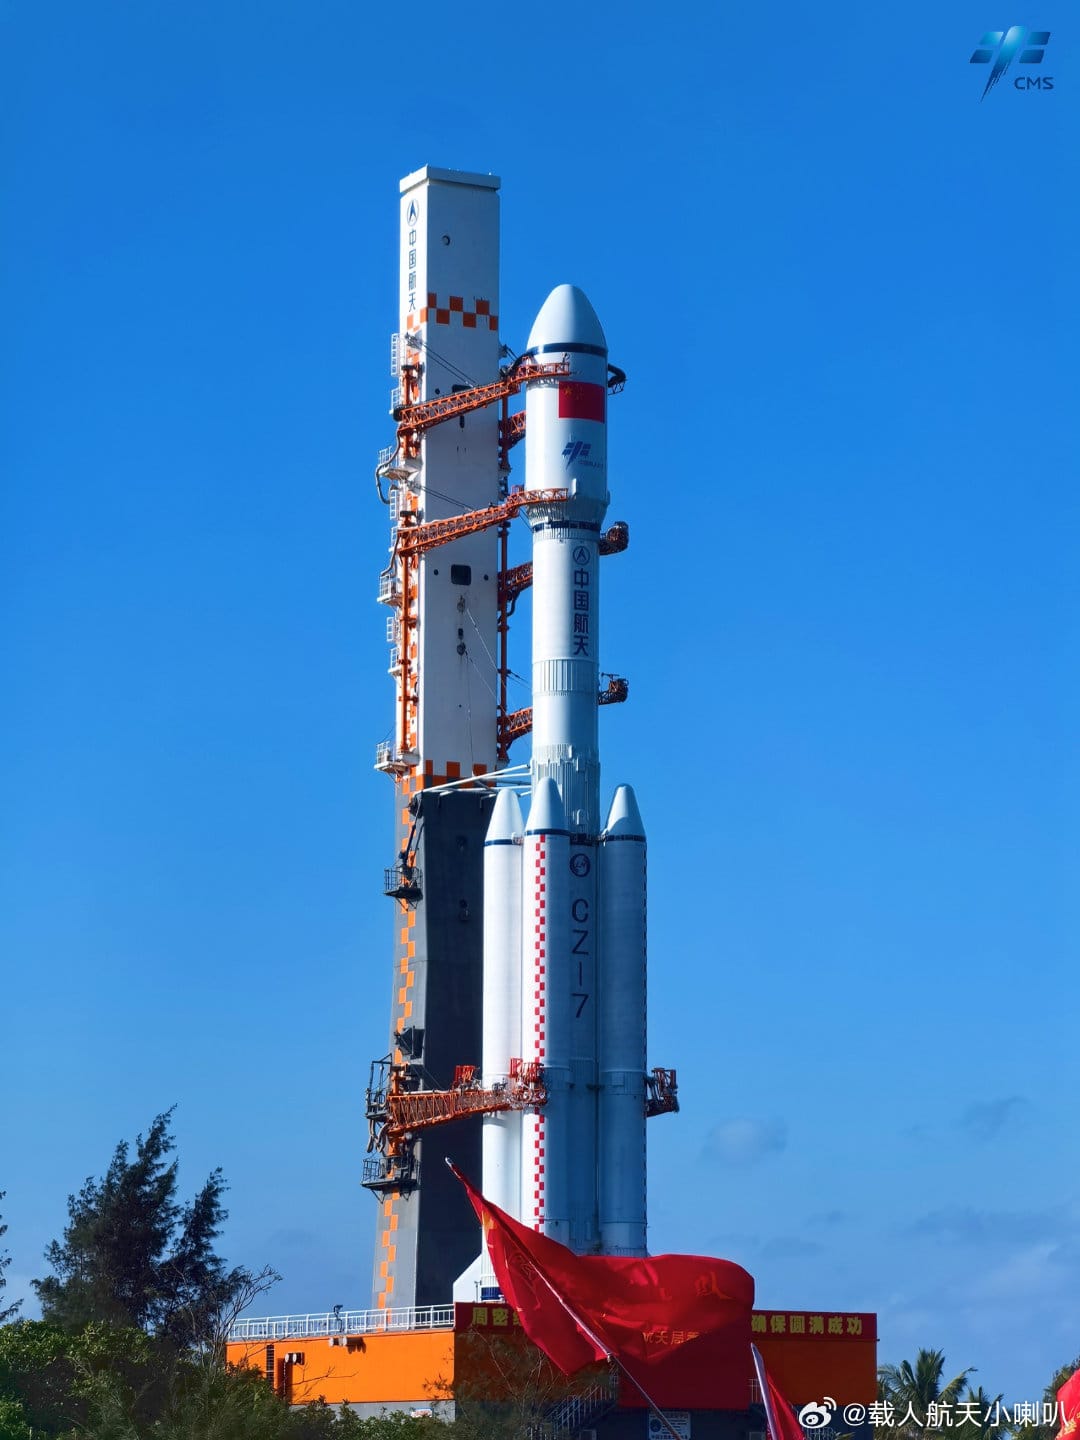 Long March 7 during roll out to its launchpad with Tianzhou 7 onboard at Wenchang Space Launch Site. ©China Manned Space Agency